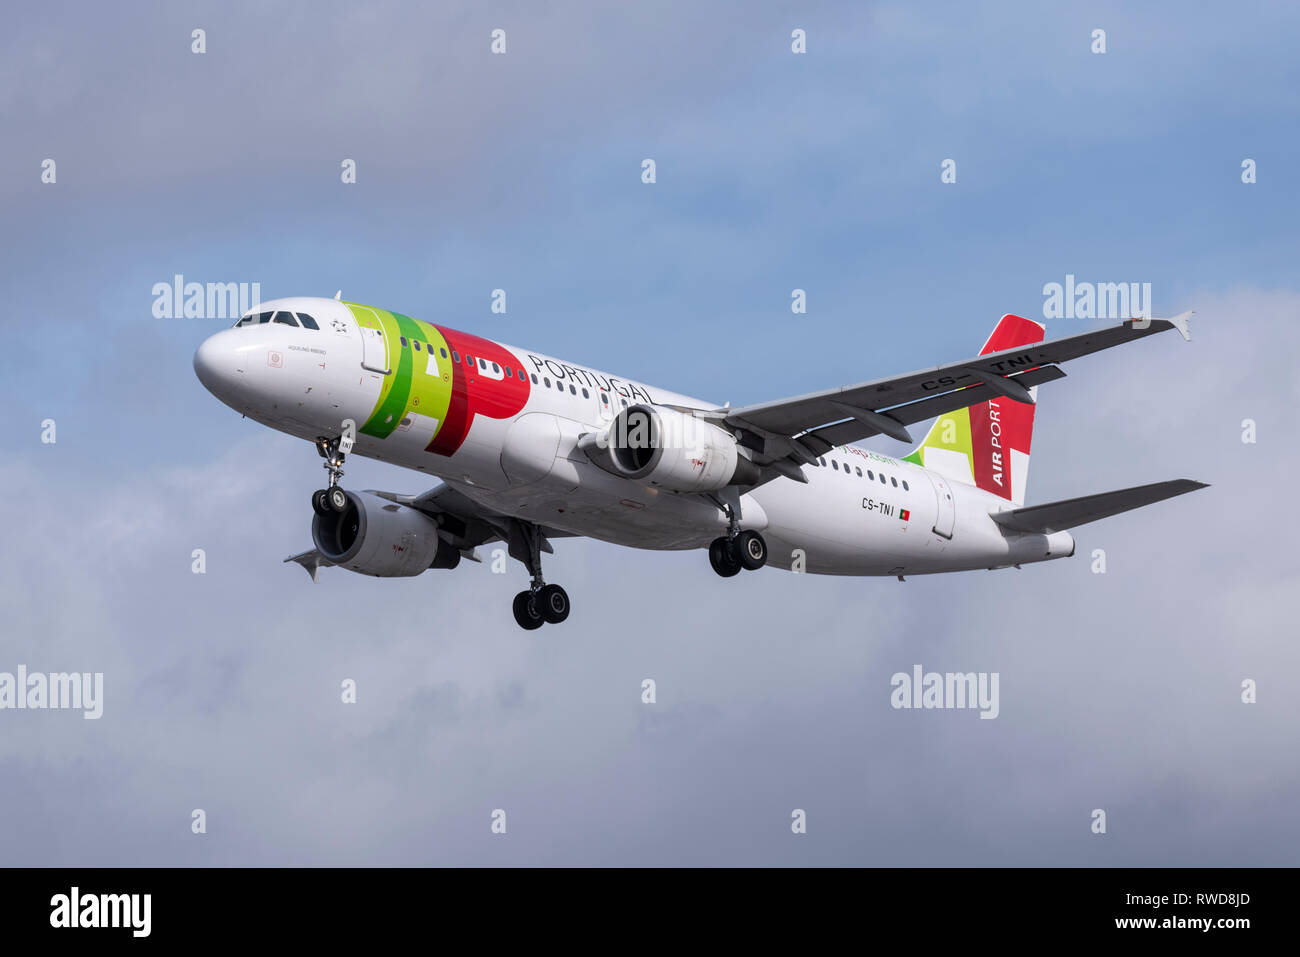 TAP Air Portugal Airbus A320 jet plane airliner CS-TNI landing at London  Heathrow Airport, UK. Named Aquilino Ribeiro. Space for copy Stock Photo -  Alamy